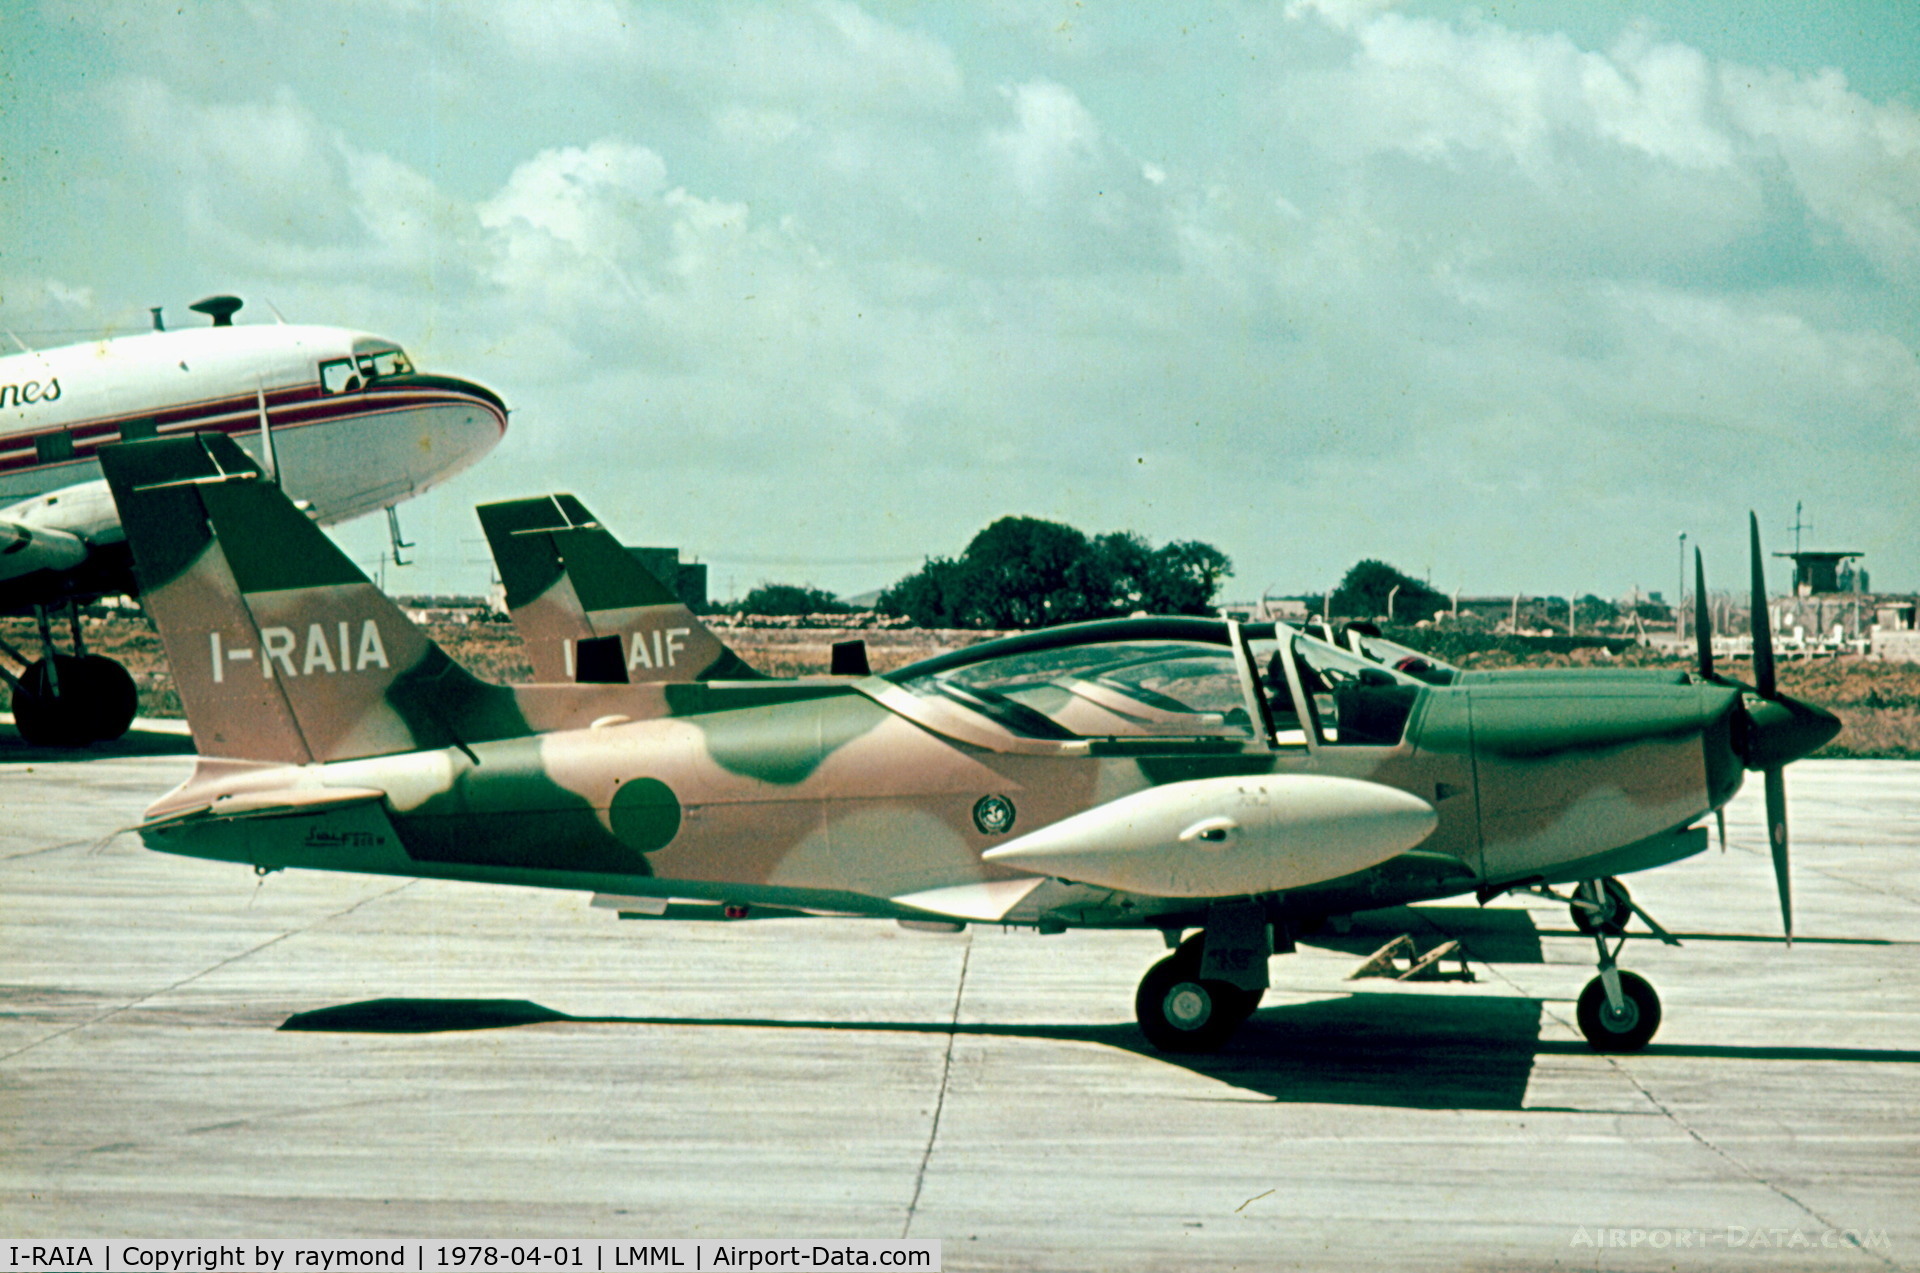 I-RAIA, Savoia-Marchetti SM260 C/N 716/48-001, SM260s I-RAIA and I-RAIF on delivery to the Libyan Air Force back in 1978 through Malta.